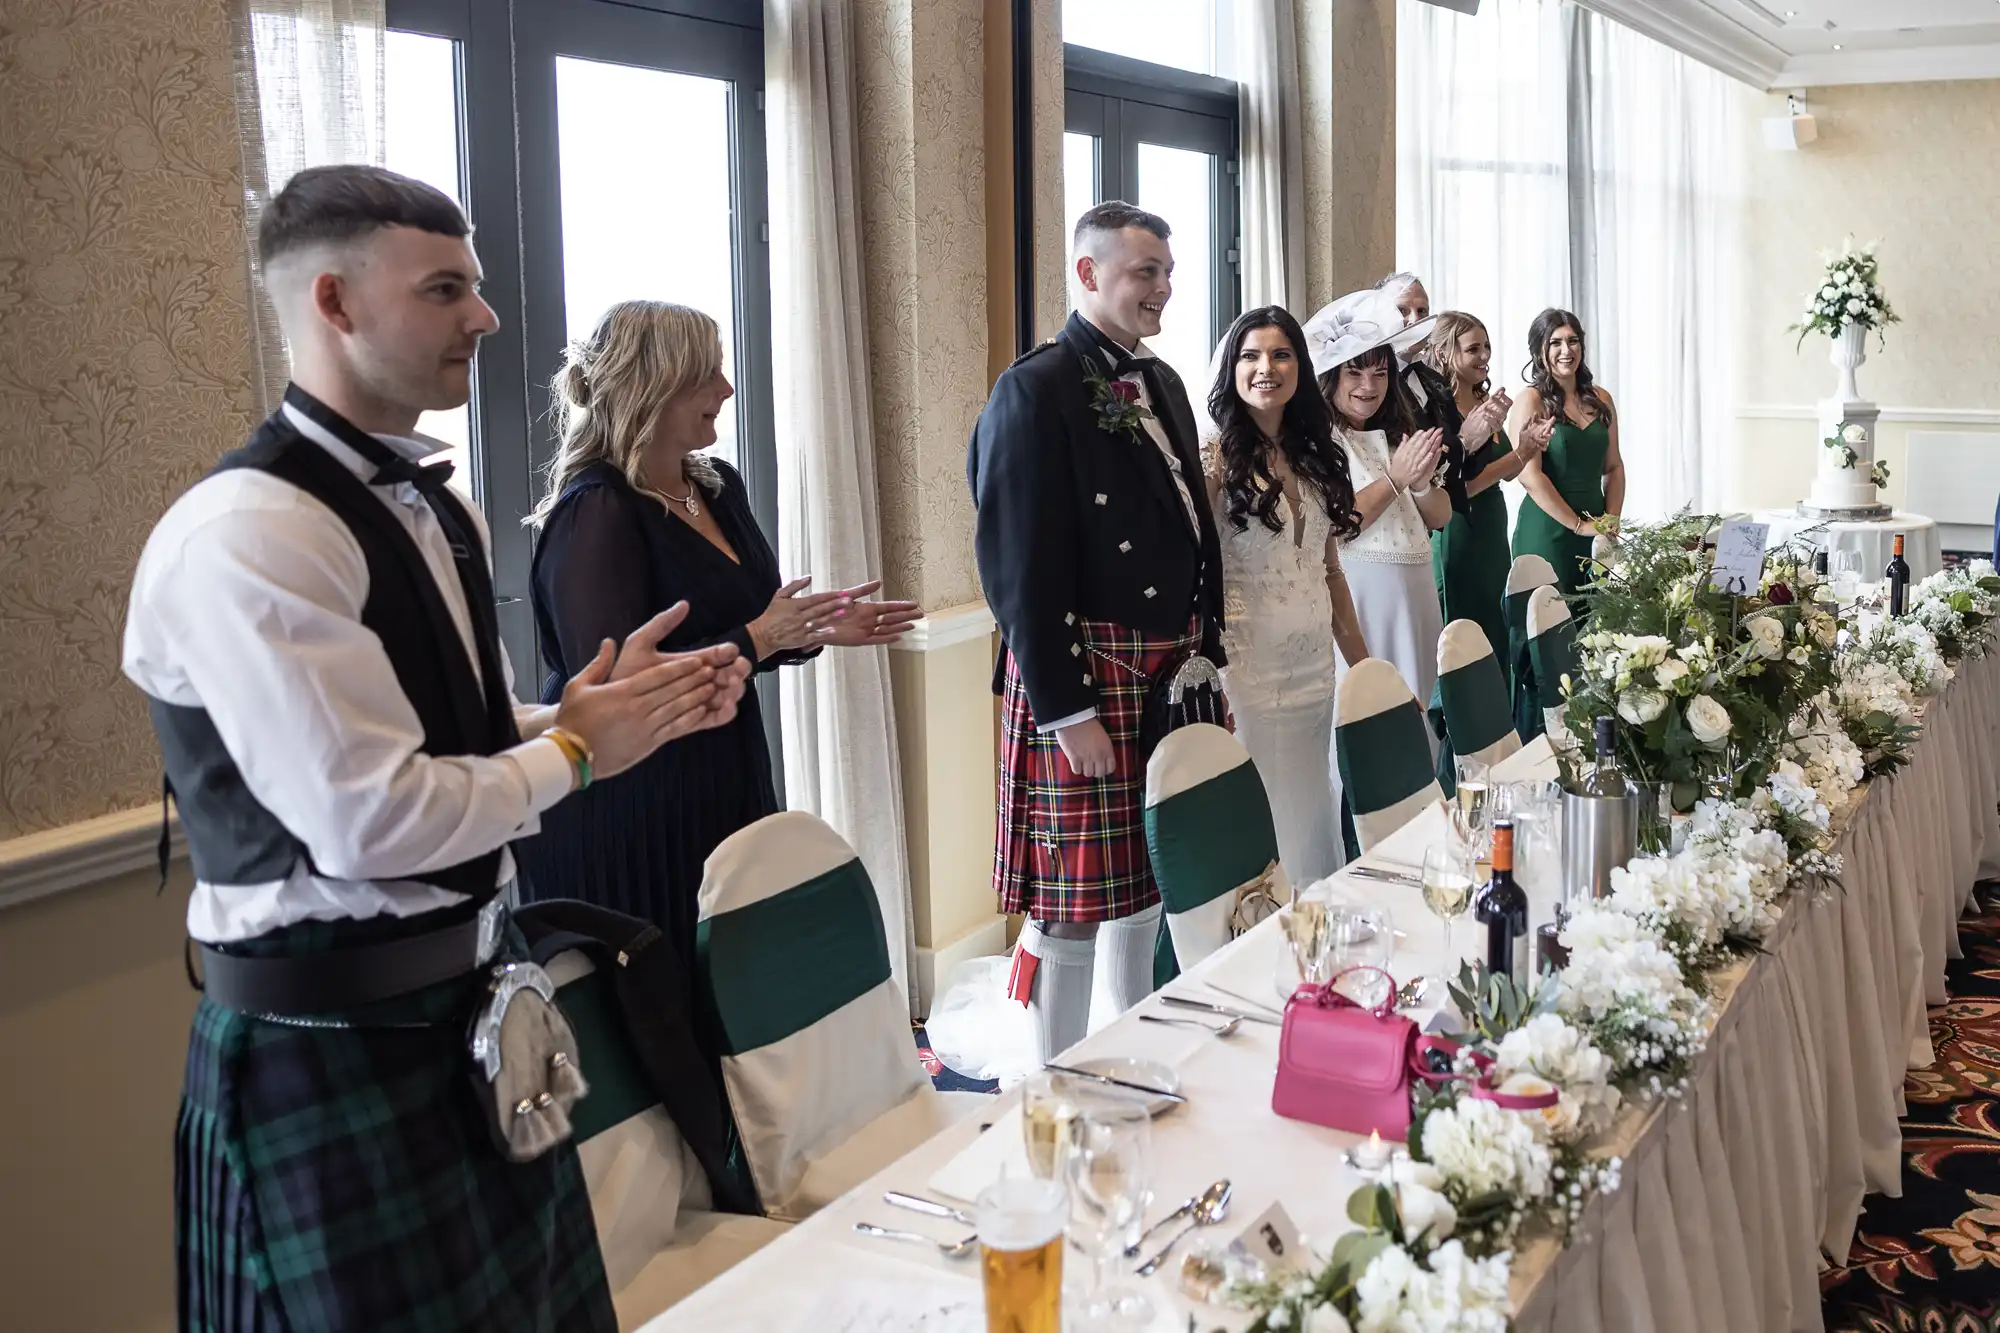 Guests in formal attire, including kilts, applaud at a wedding reception table decorated with a floral centerpiece.